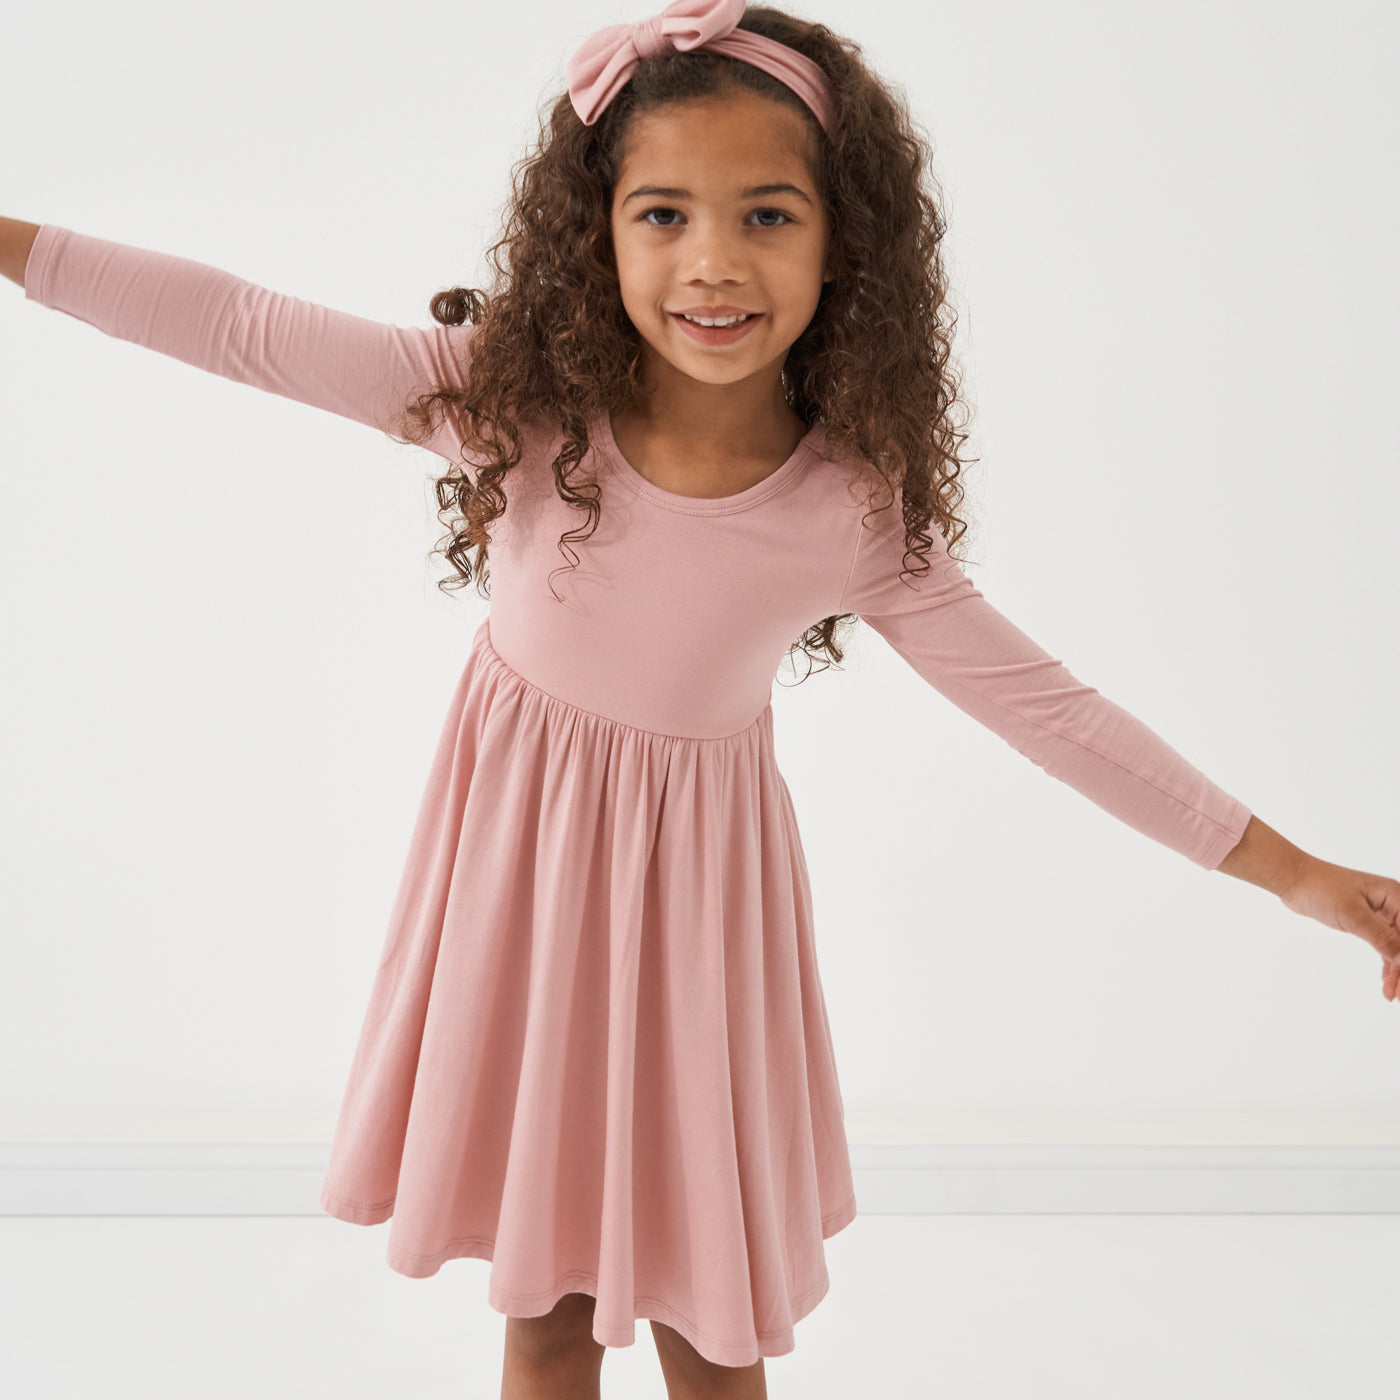 Child posing wearing a Mauve Blush twirl dress paired with a matching luxe bow headband